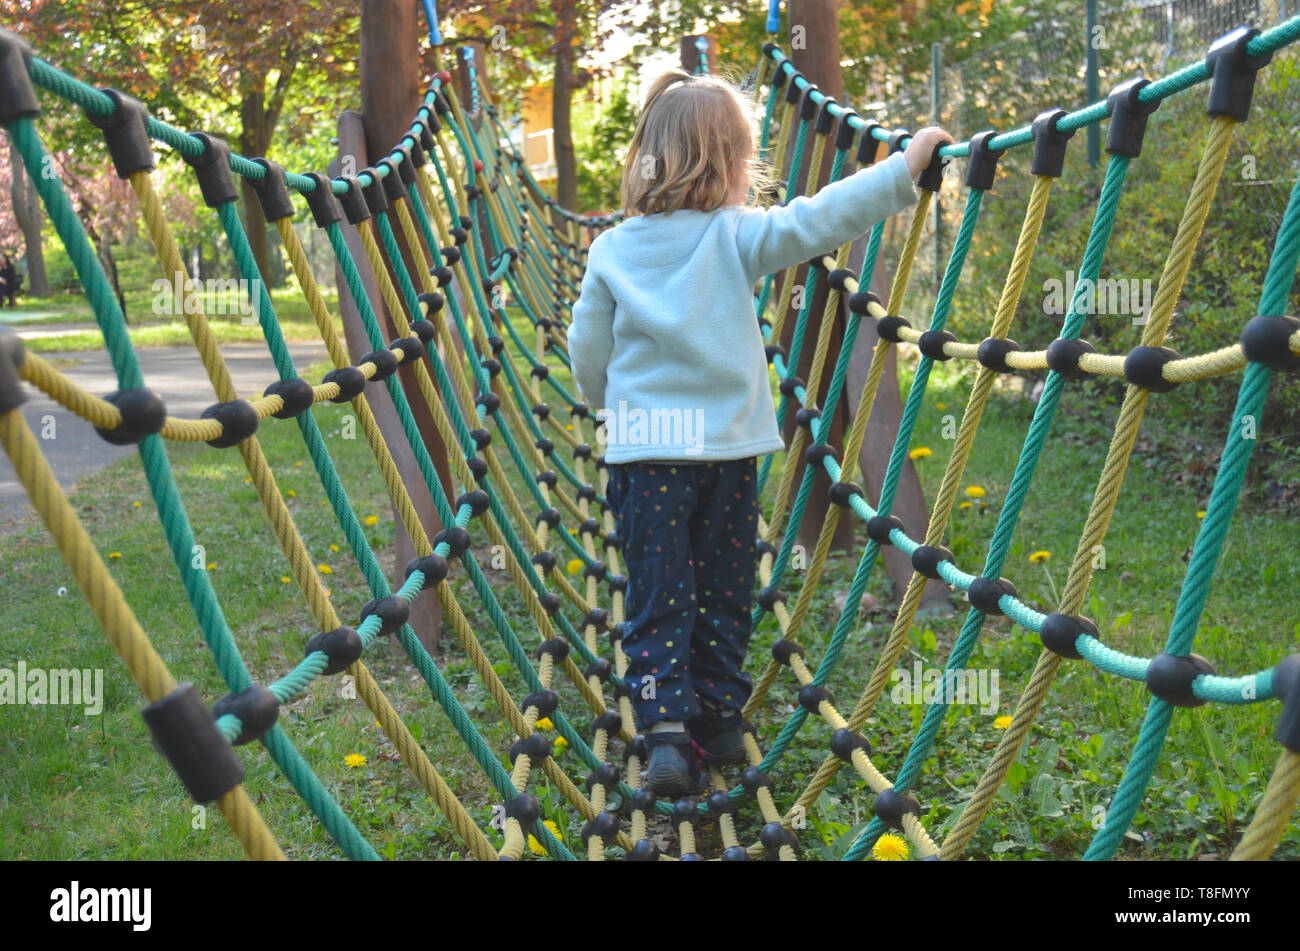 Cute little cca 3 year old girl walking on a net and rope  bridge-like play structure, on a sunny spring playground afternoon, back view. Stock Photo